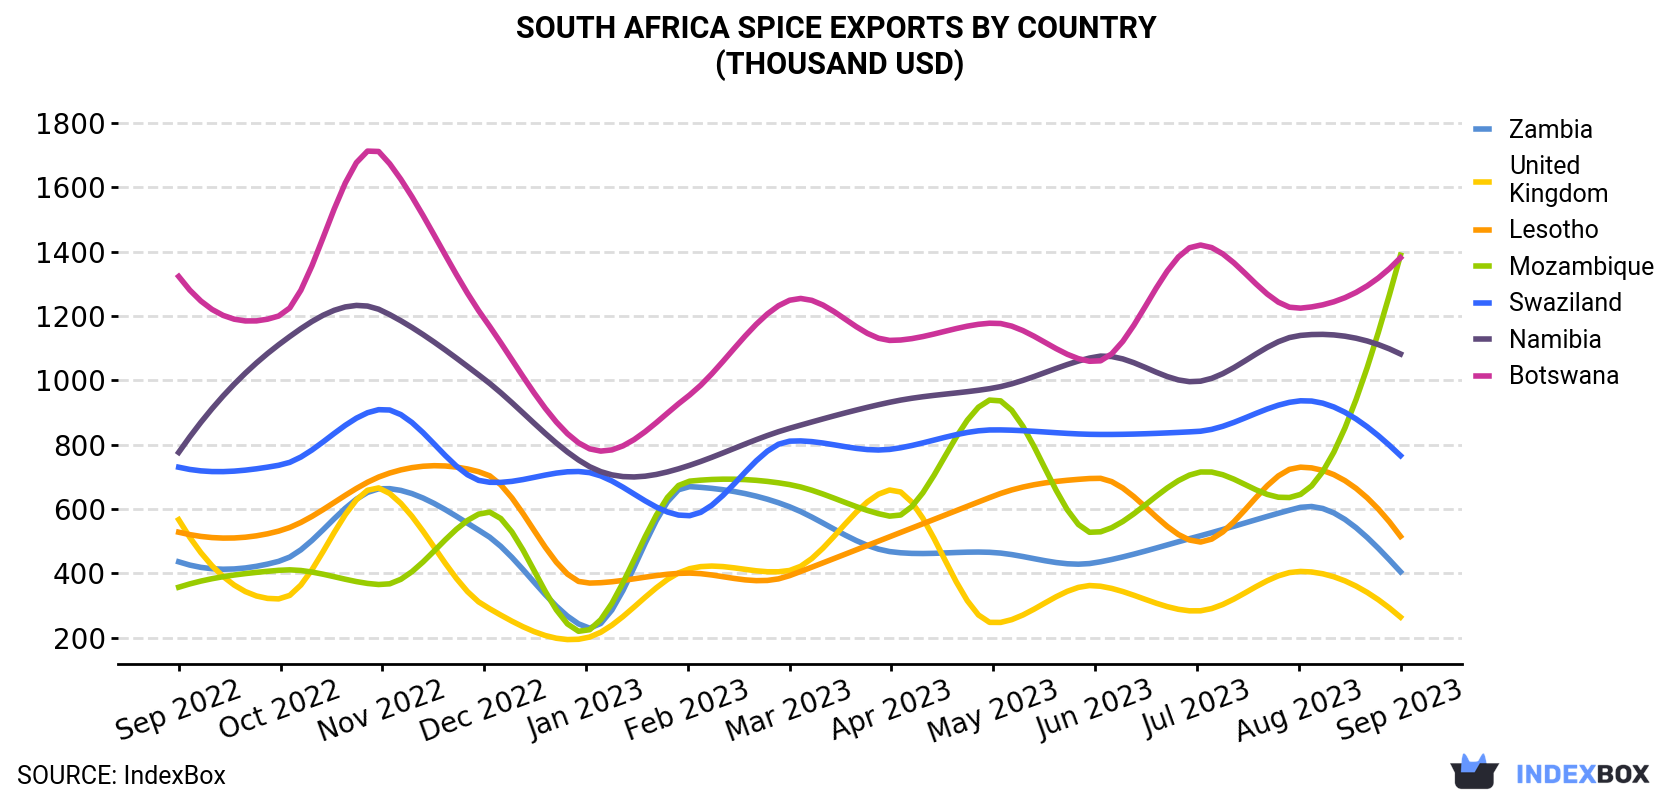 South Africa Spice Exports By Country (Thousand USD)